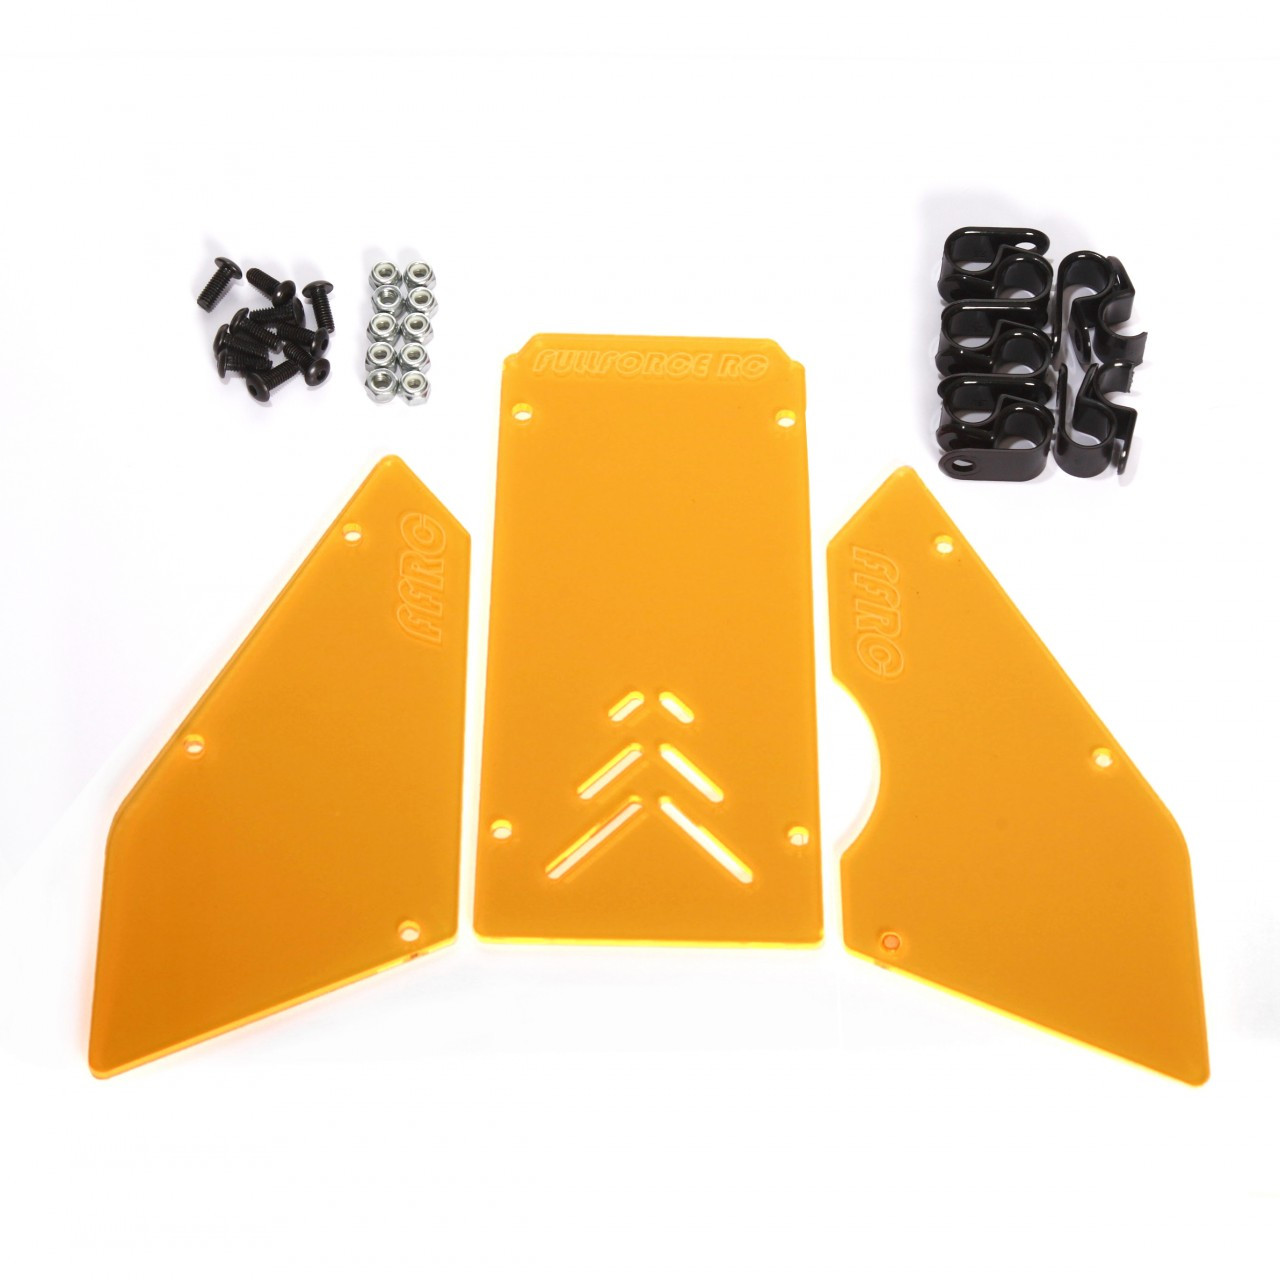 HPI Baja 3 piece windows available in transparent Orange!  Complete with install hardware.